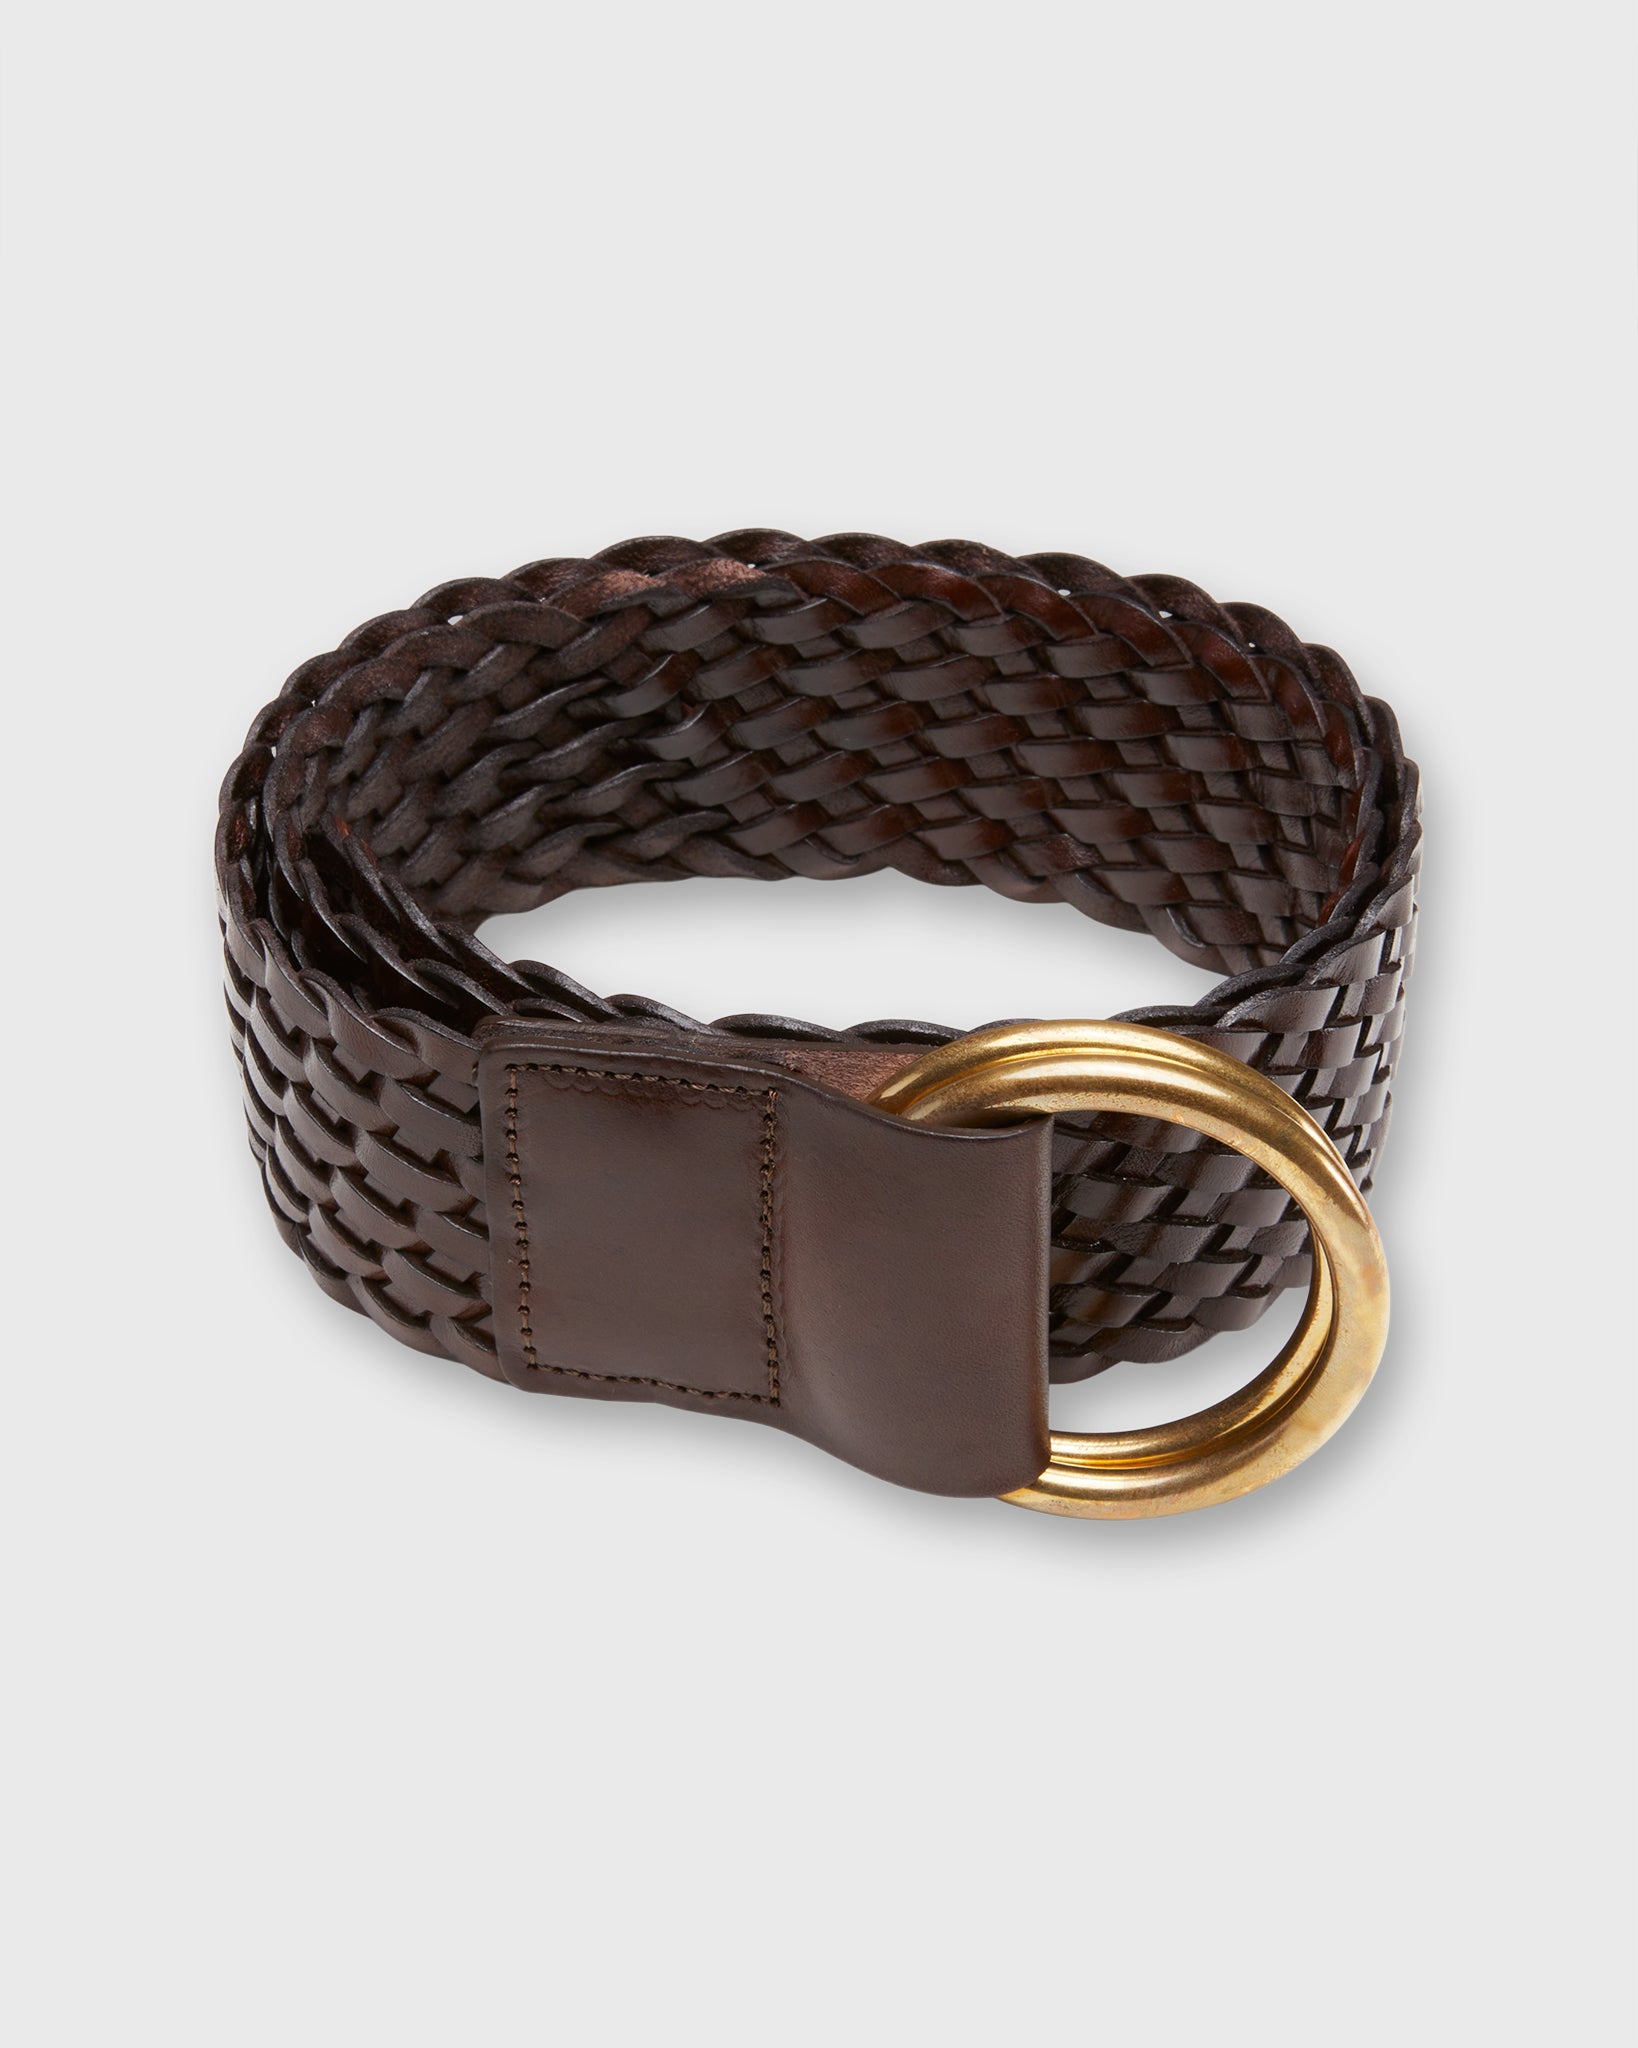 Chocolate Woven Leather Belt - Belts